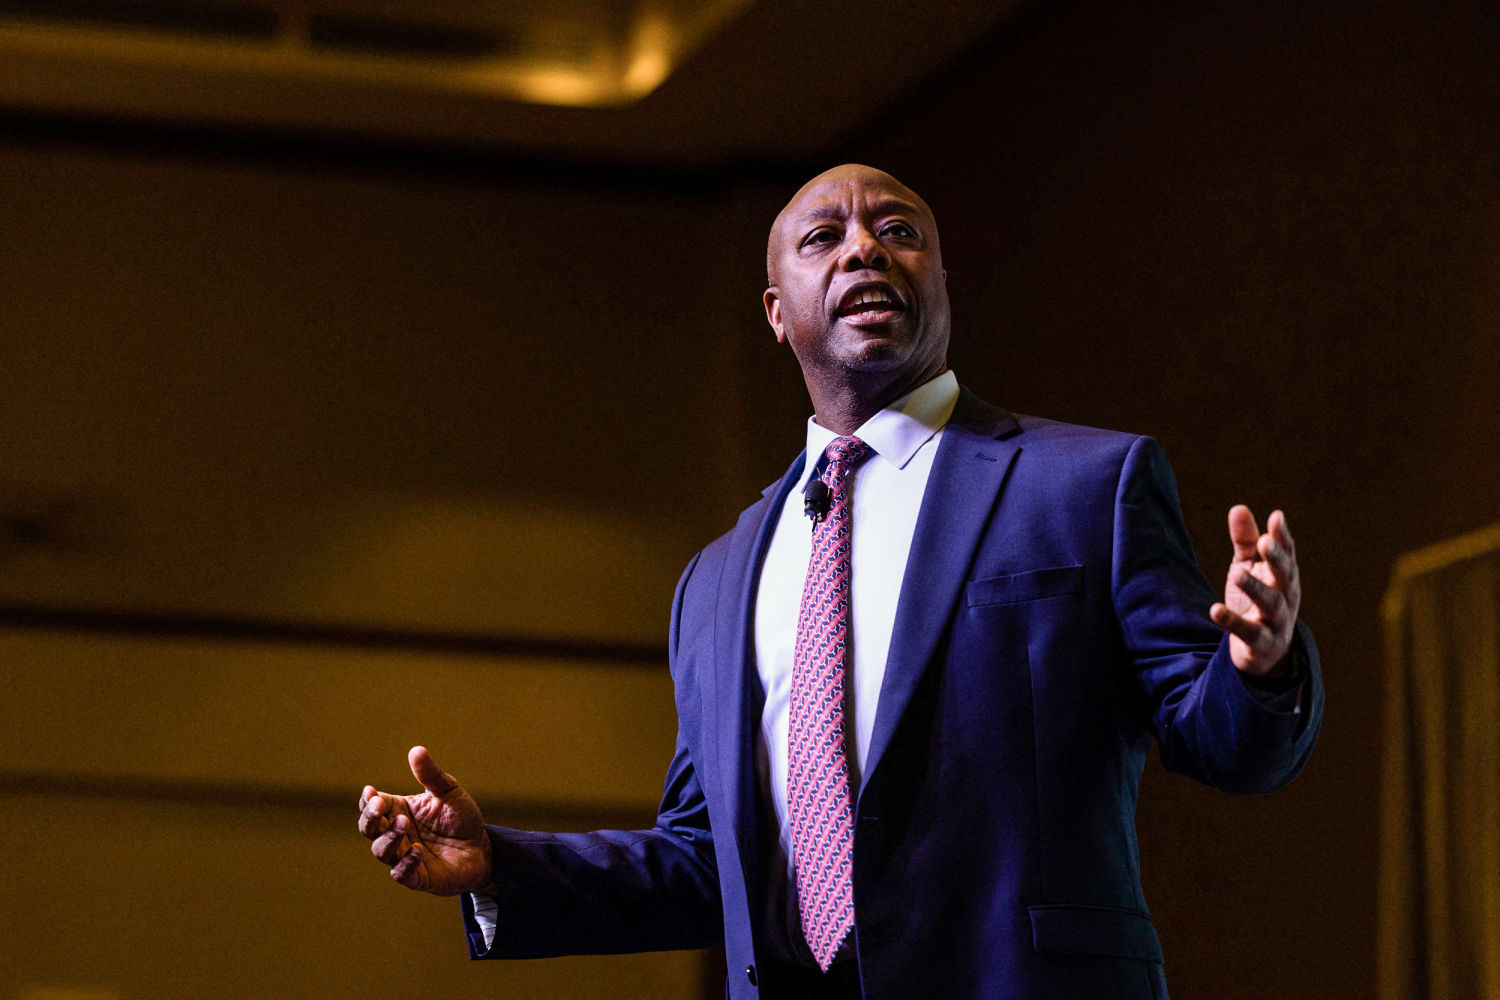 Sen. Tim Scott vows to sign the ‘most conservative, pro-life legislation’ if elected president